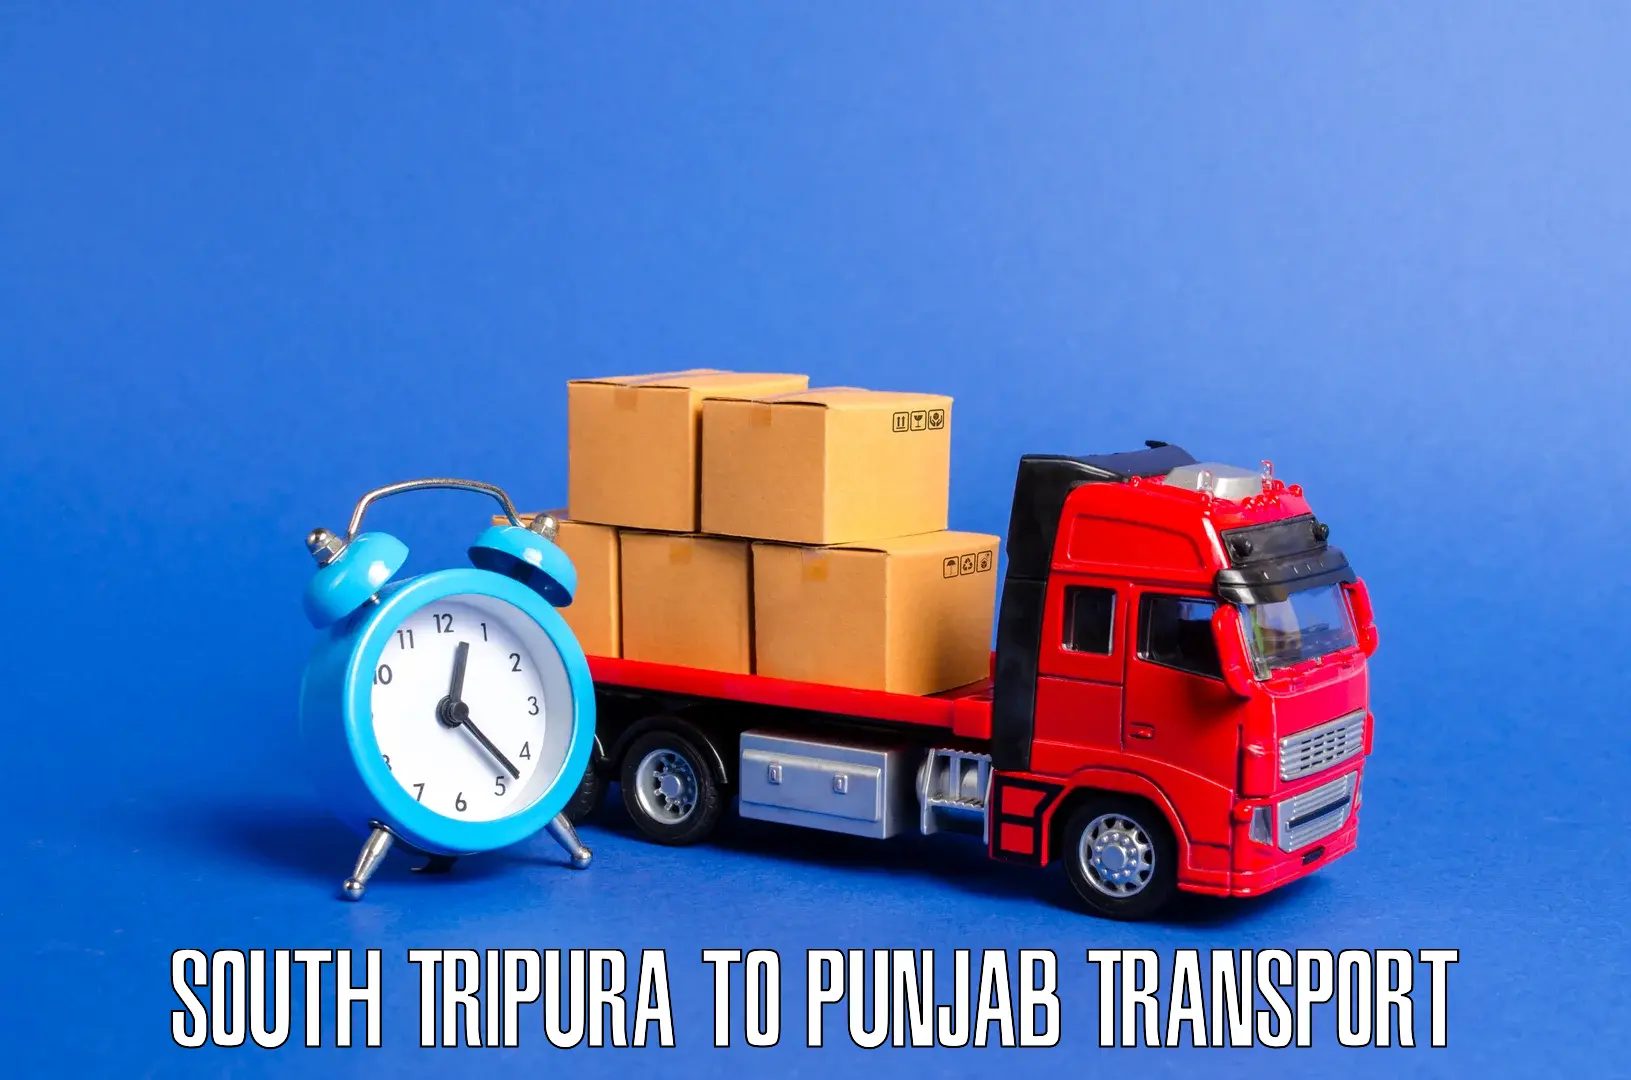 Nearby transport service South Tripura to Mohali